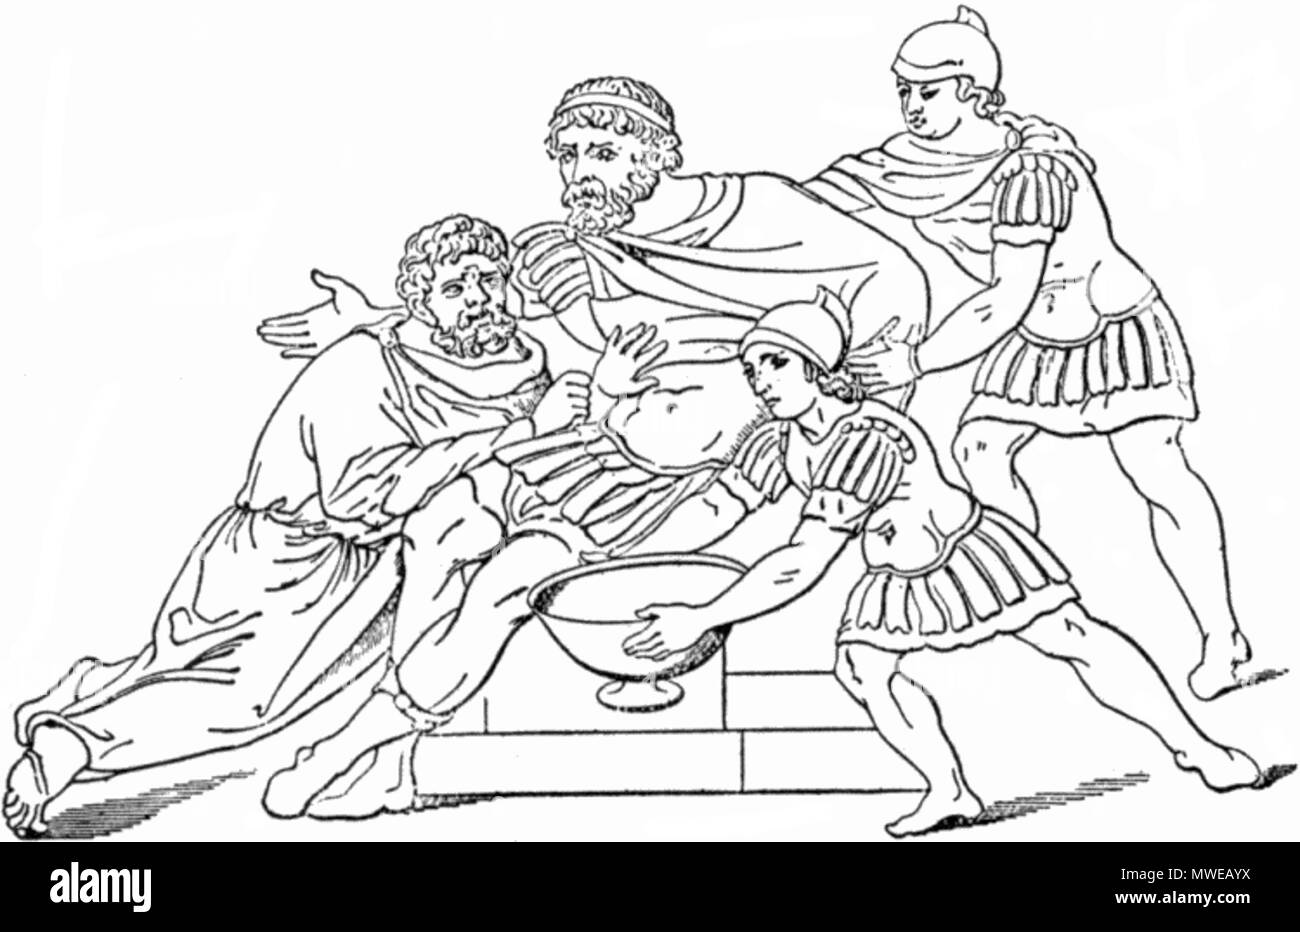 . Machaon (Son of Asklepios), The first Greek military surgeon, attending to the wounded Menelaus. 07/12/2008. Unknown 293 Illus-035 Stock Photo